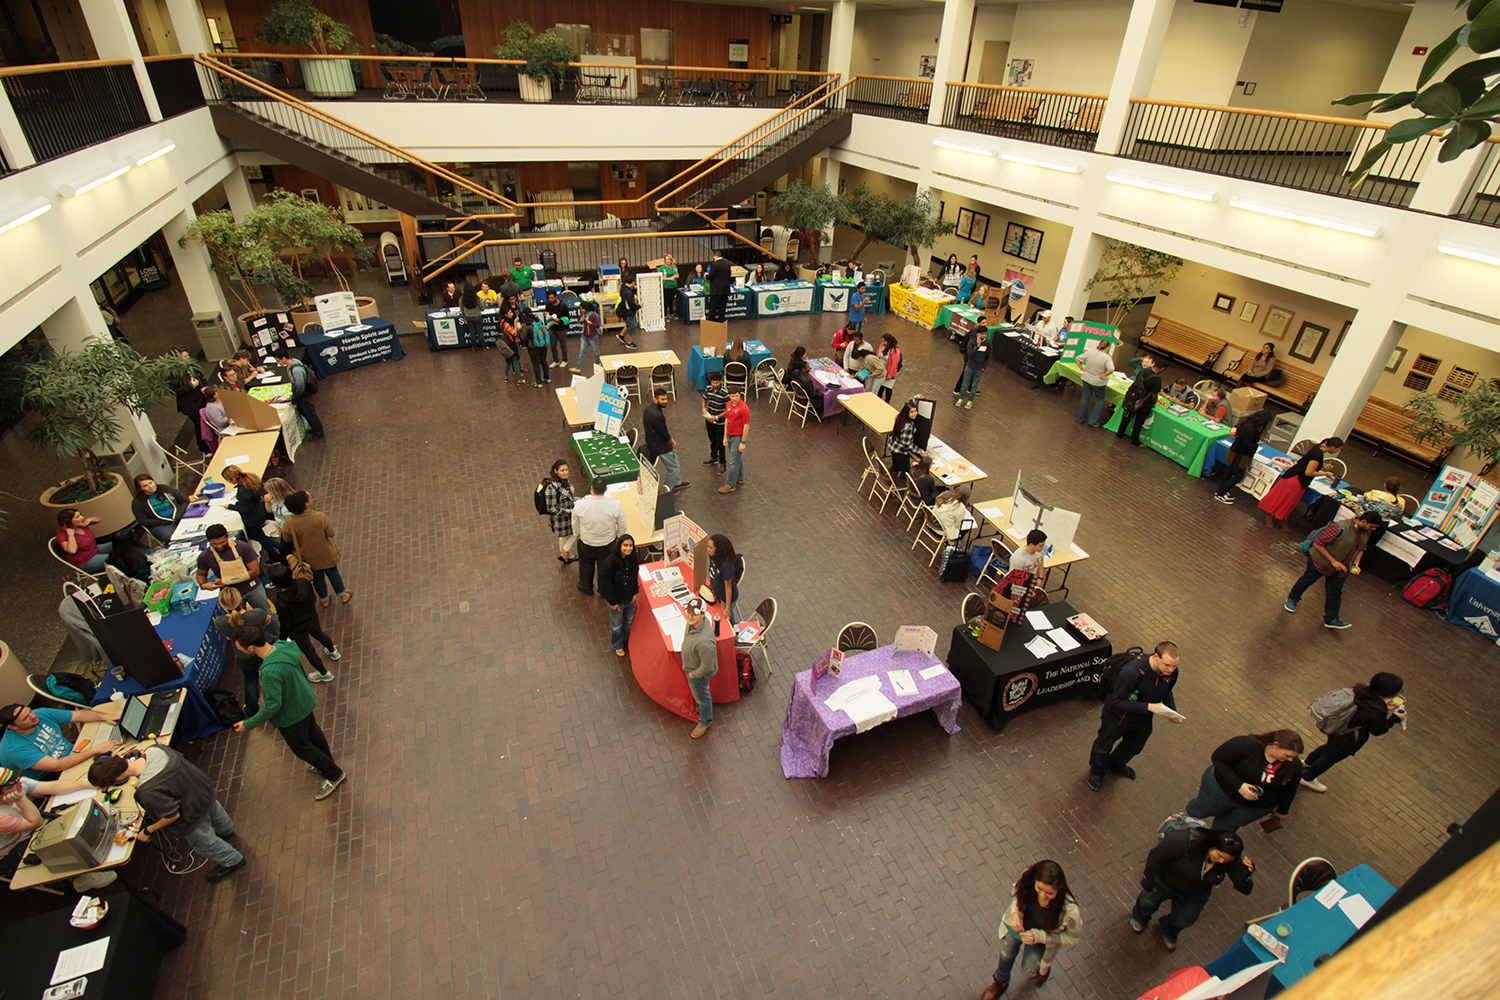 PHOTO: The Spring 2017 UHCL Student Organization Expo took place Jan. 26. The event aims to help students find common interests. Photo by The Signal reporter E.J. Santillian.